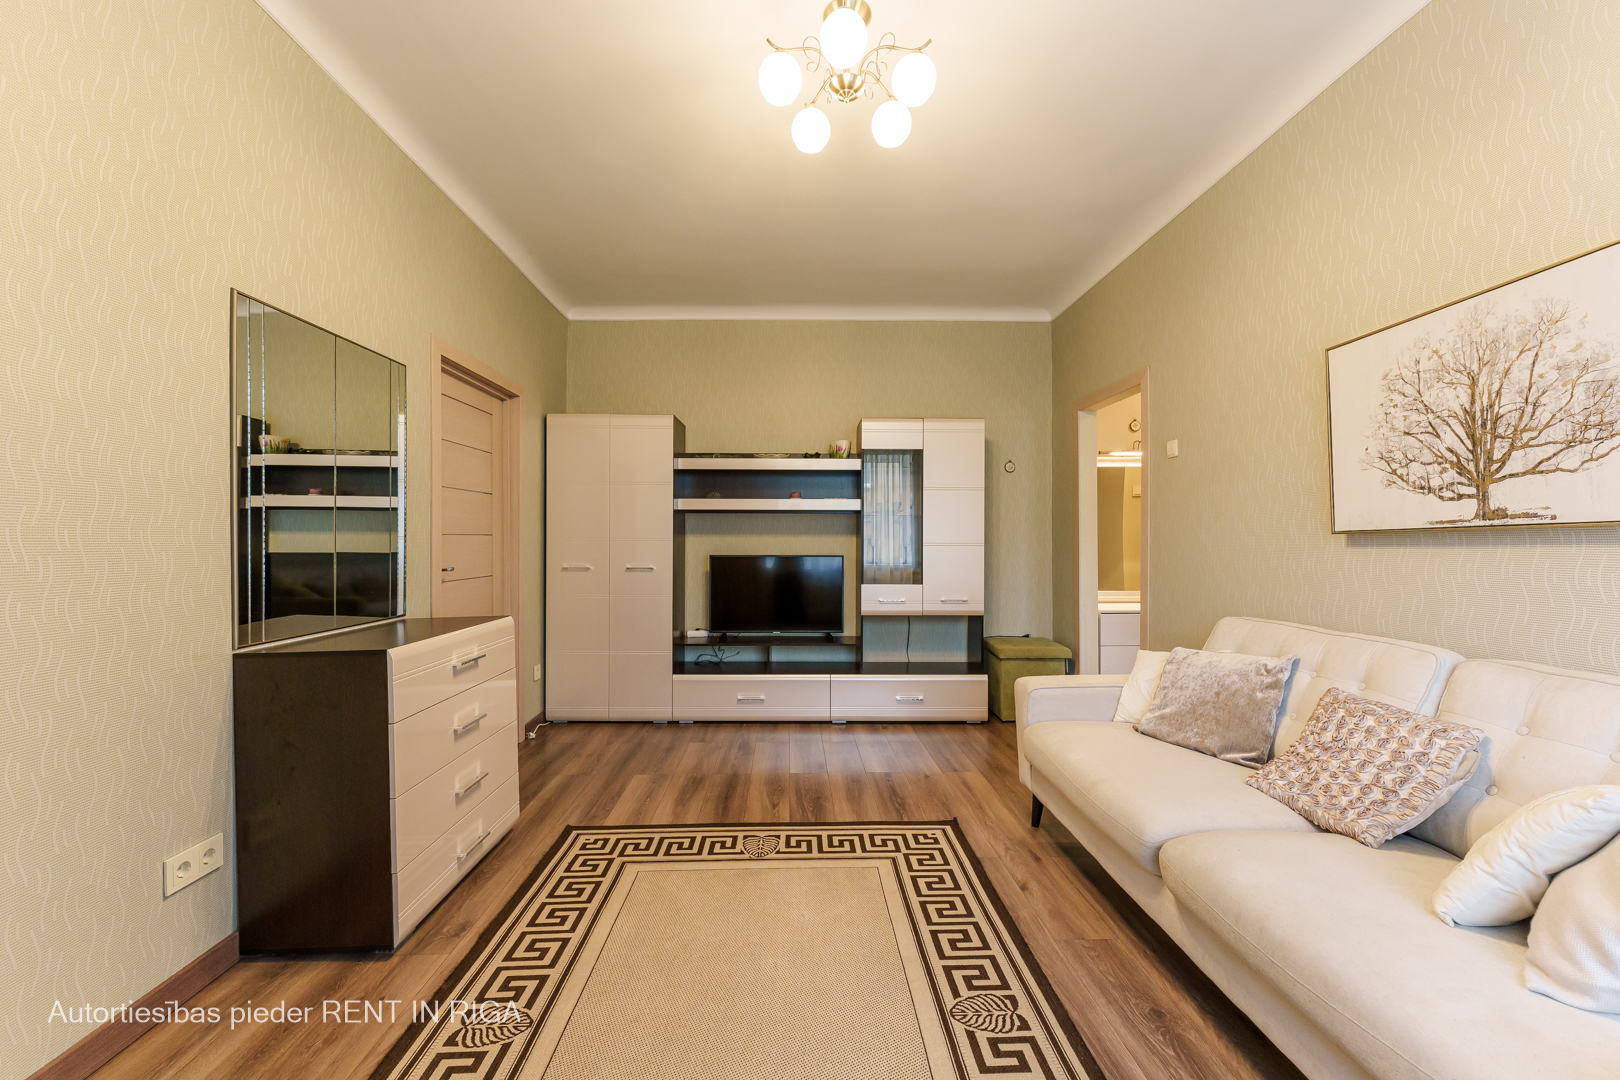 Apartment for sale, Apes street 1D - Image 1